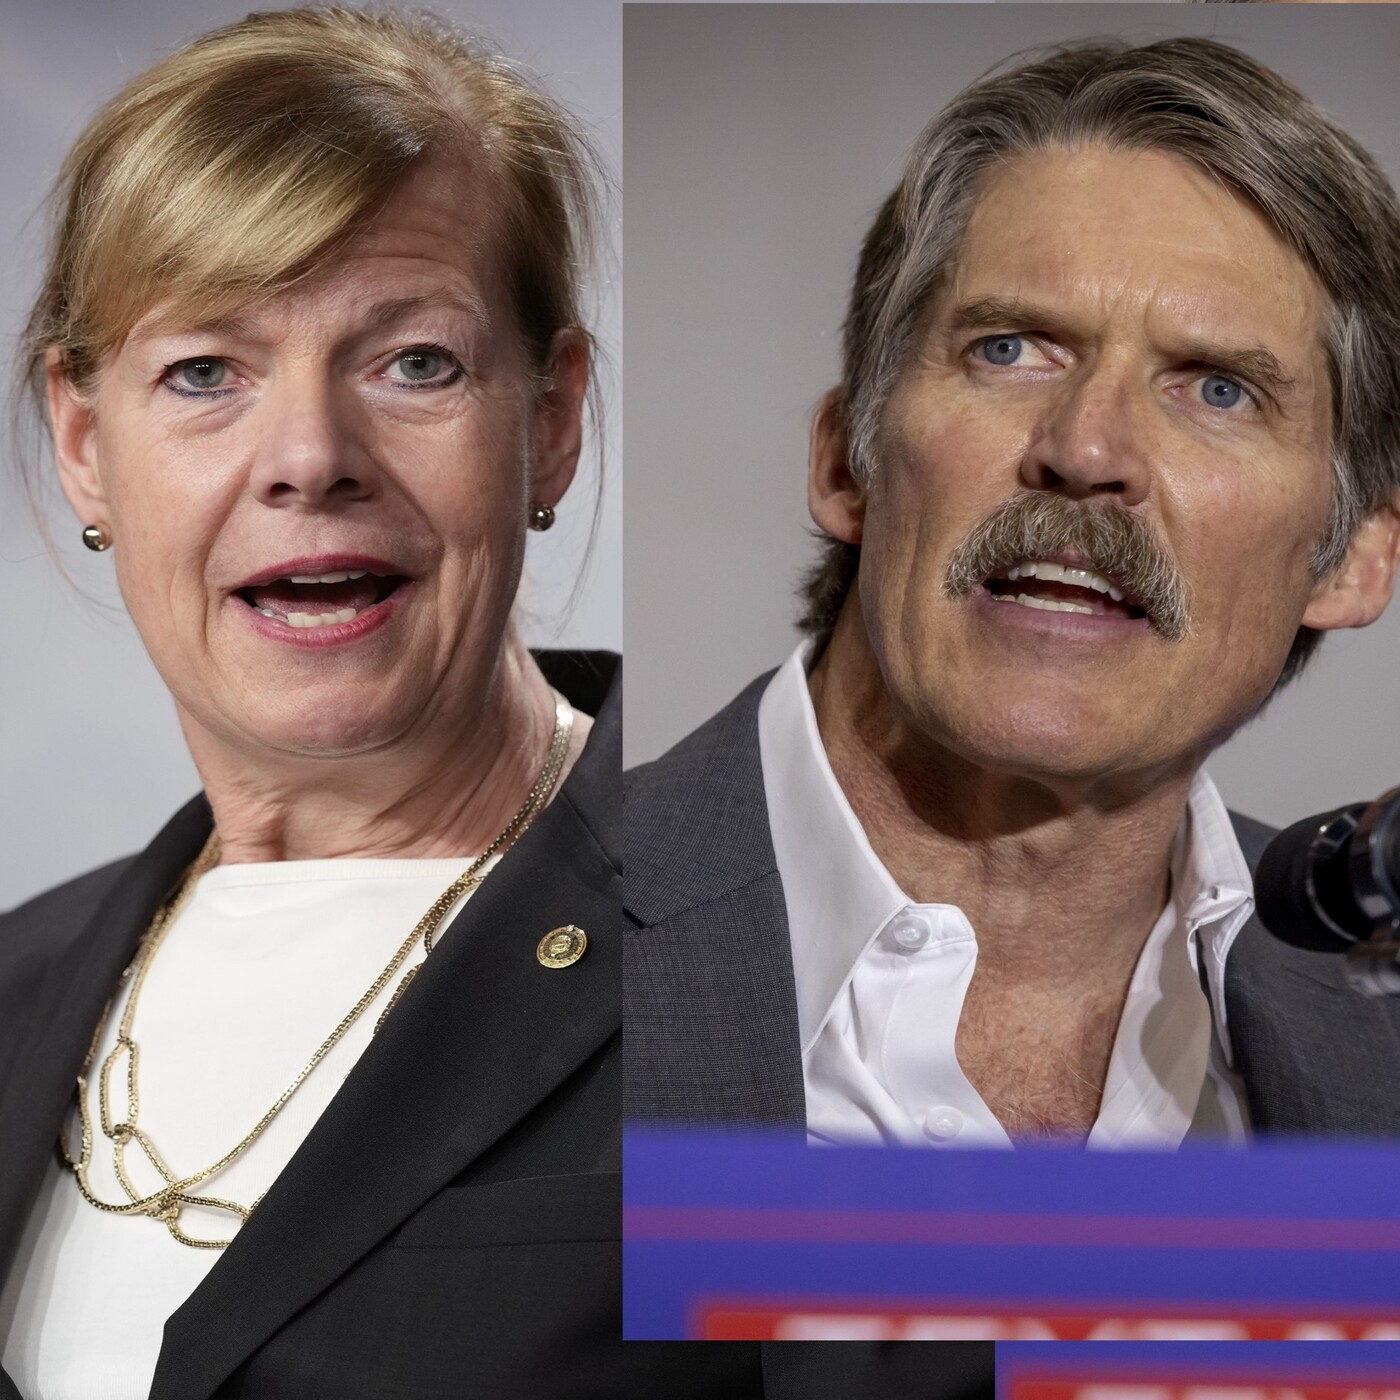 Tammy Baldwin vs. Eric Hovde is tighter than it should be